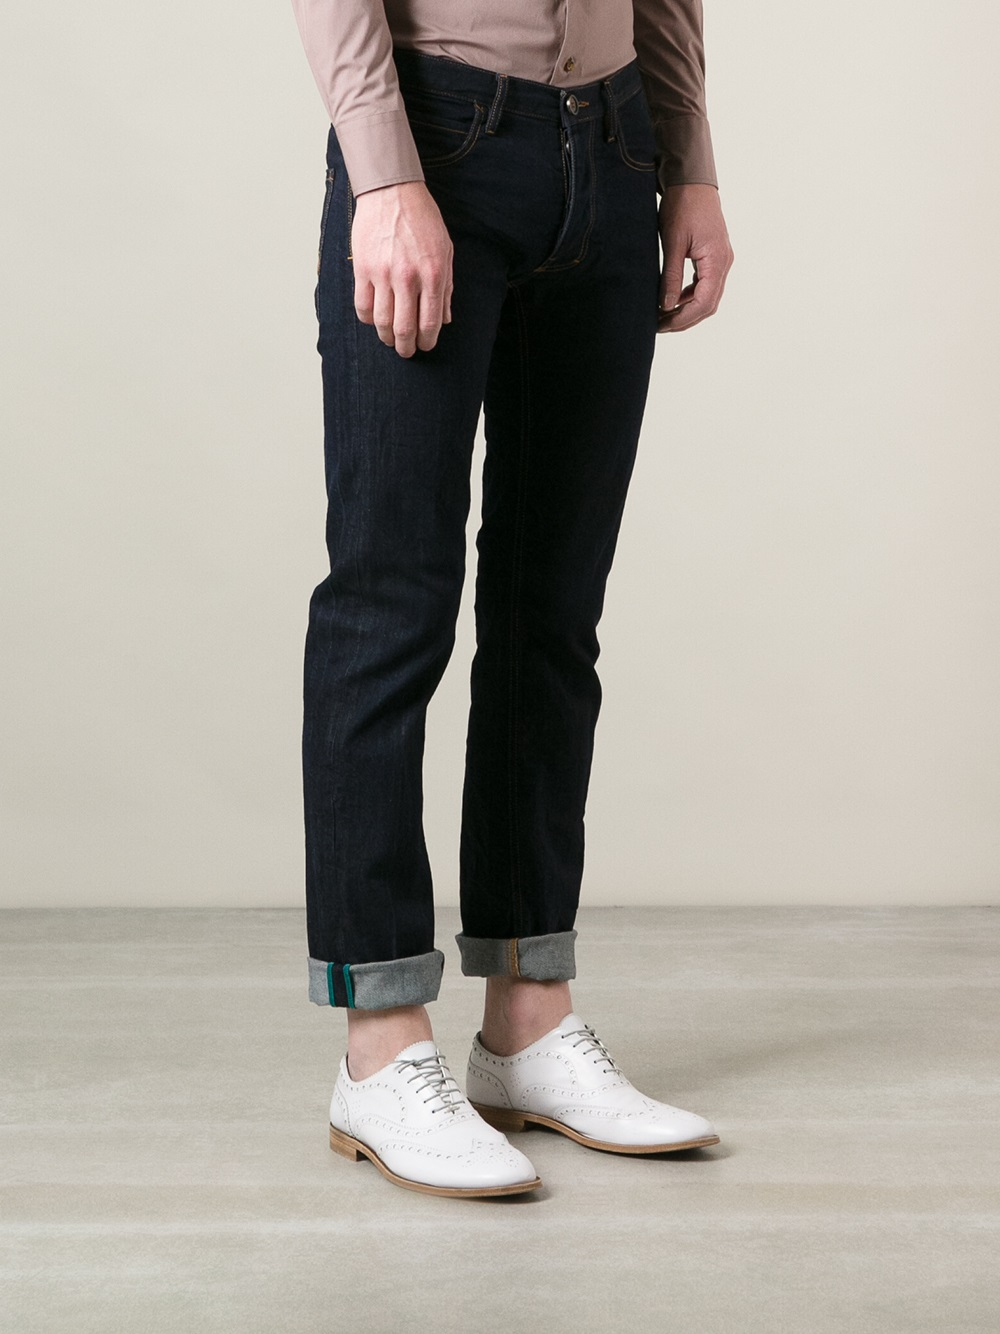 Lyst - Vivienne Westwood Anglomania Slim Fit Jeans in Blue for Men